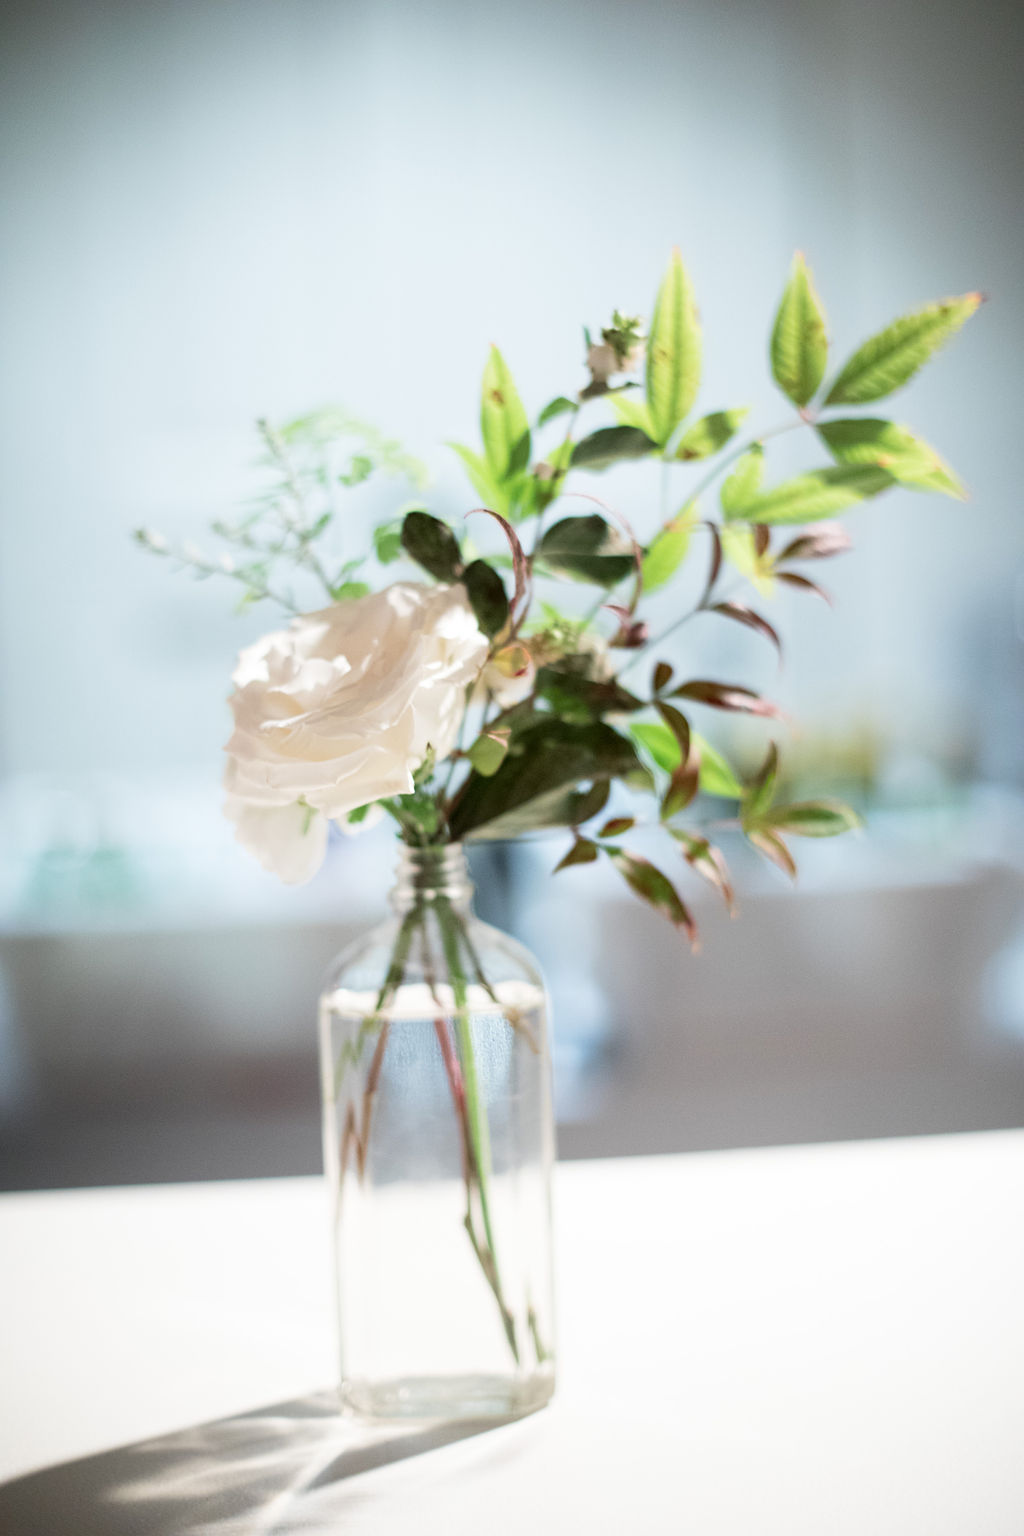 SImple bud vase with a white garden rose and greenery. Nashville Wedding Florist